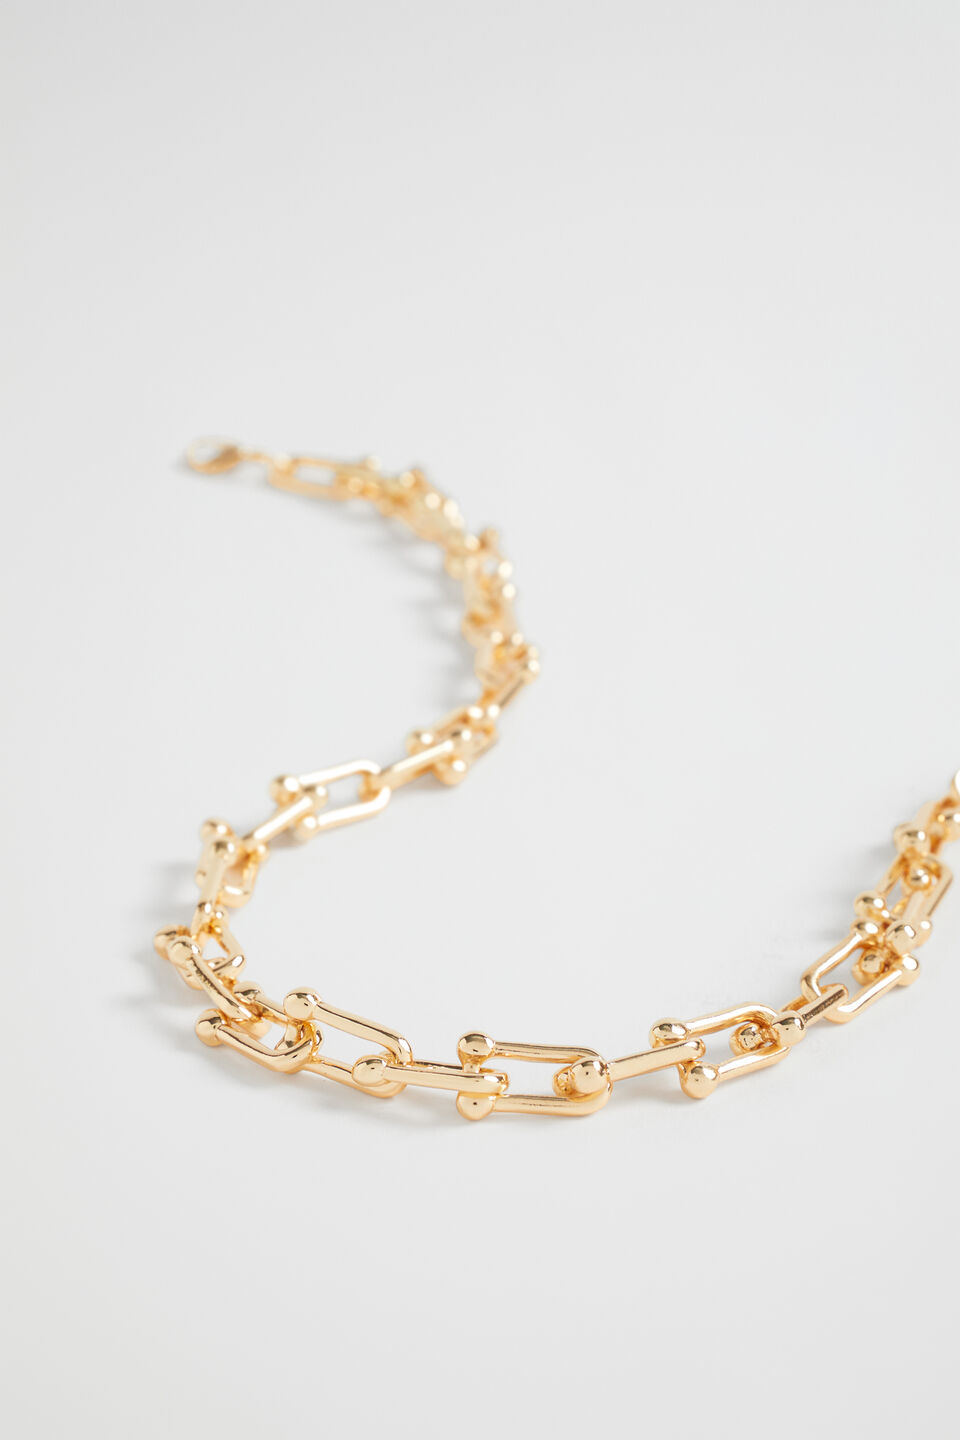 Ball Link Chain Necklace  Gold